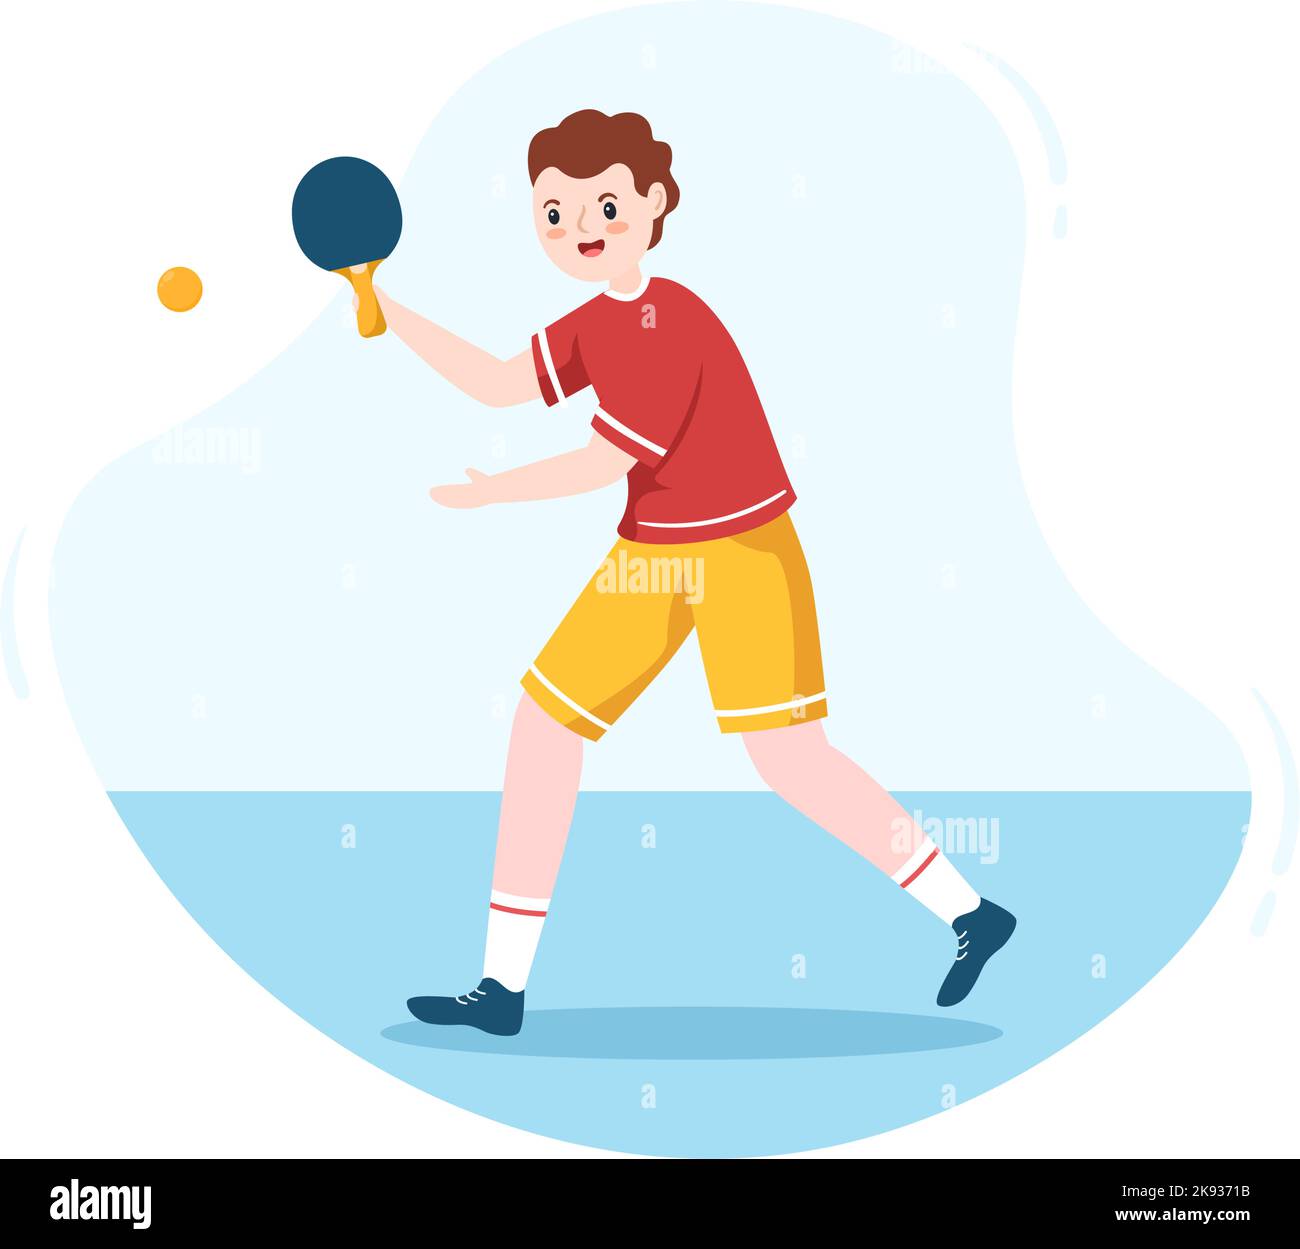 People Playing Table Tennis Sports with Racket and Ball of Ping Pong Game Match in Flat Cartoon Hand Drawn Templates Illustration Stock Vector